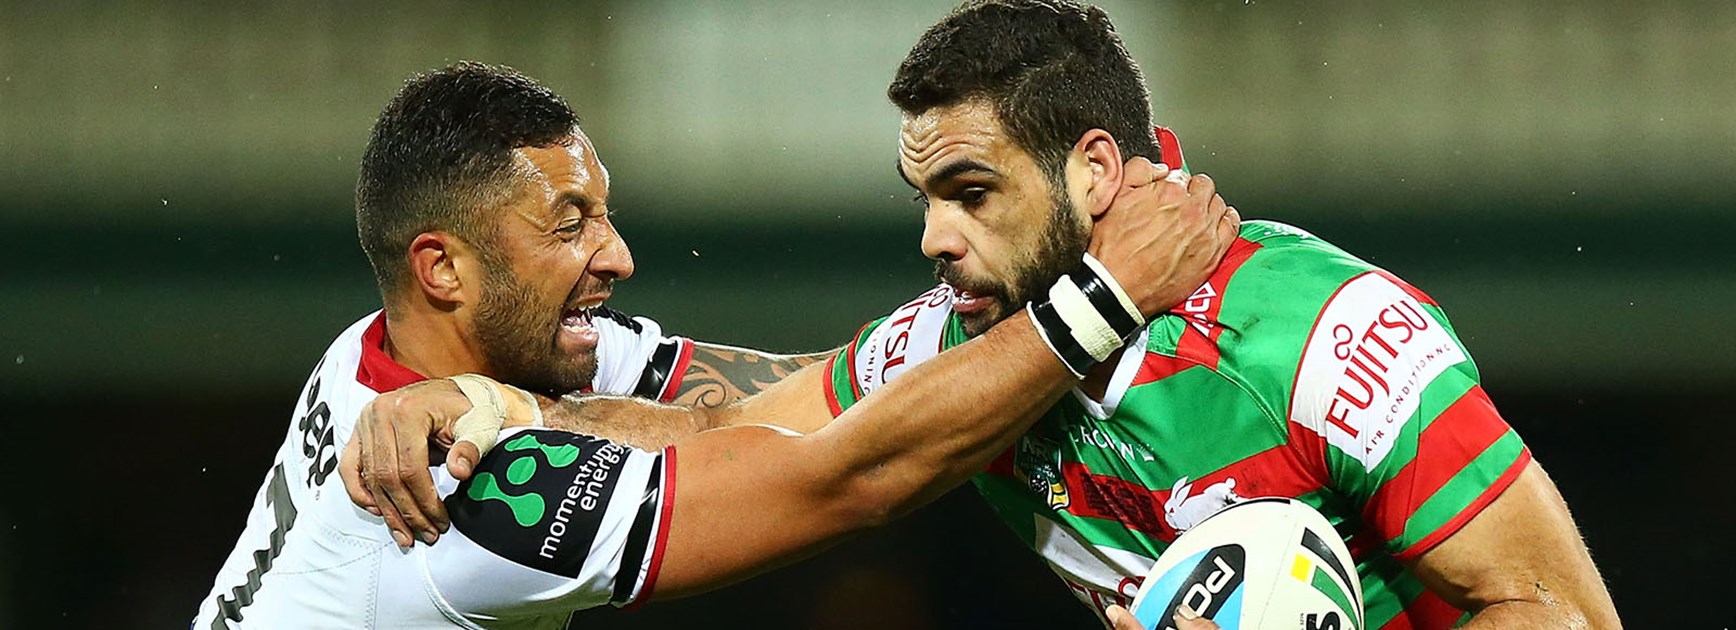 Greg Inglis is tackle by Benji Marshall at the SCG.